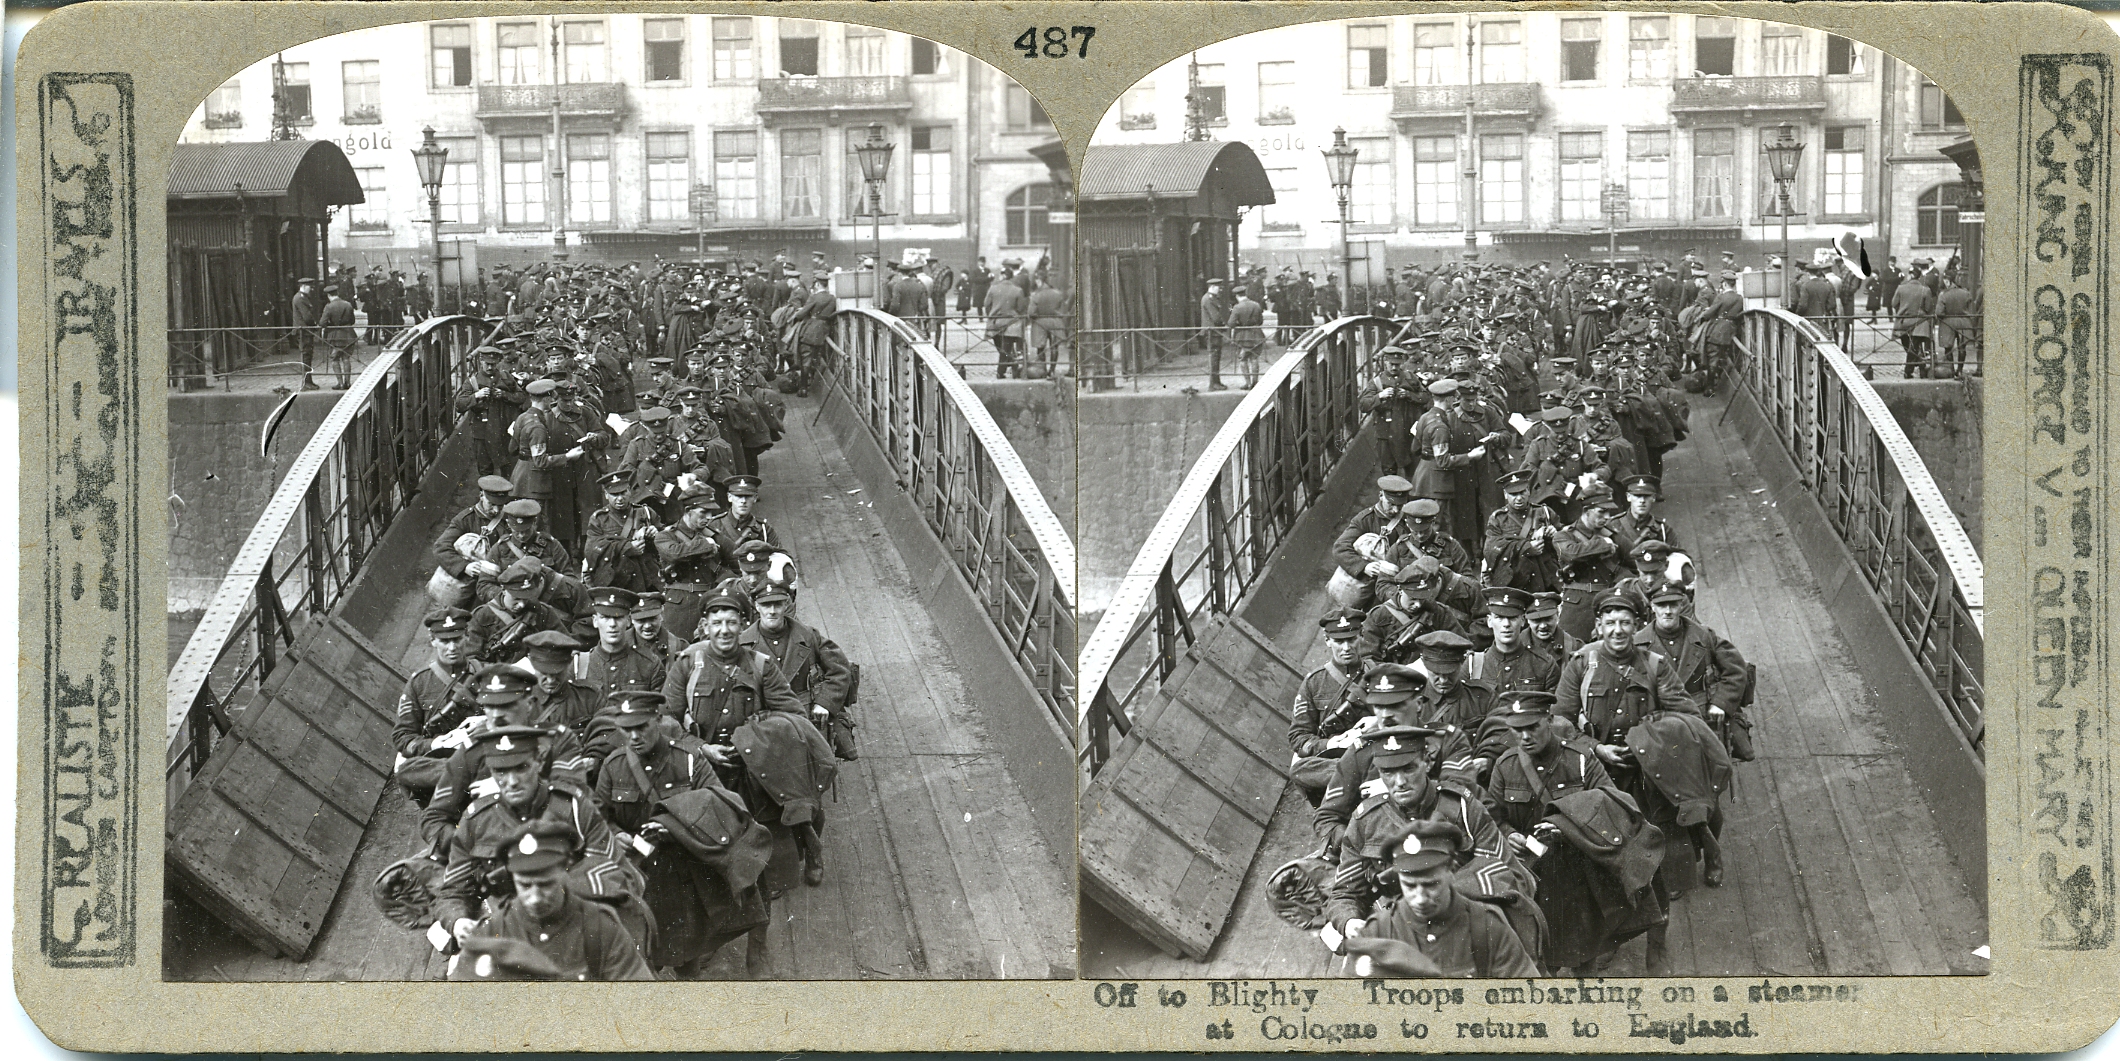 Off to Blighty. Troops embarking on a steamer at Cologne to return to England